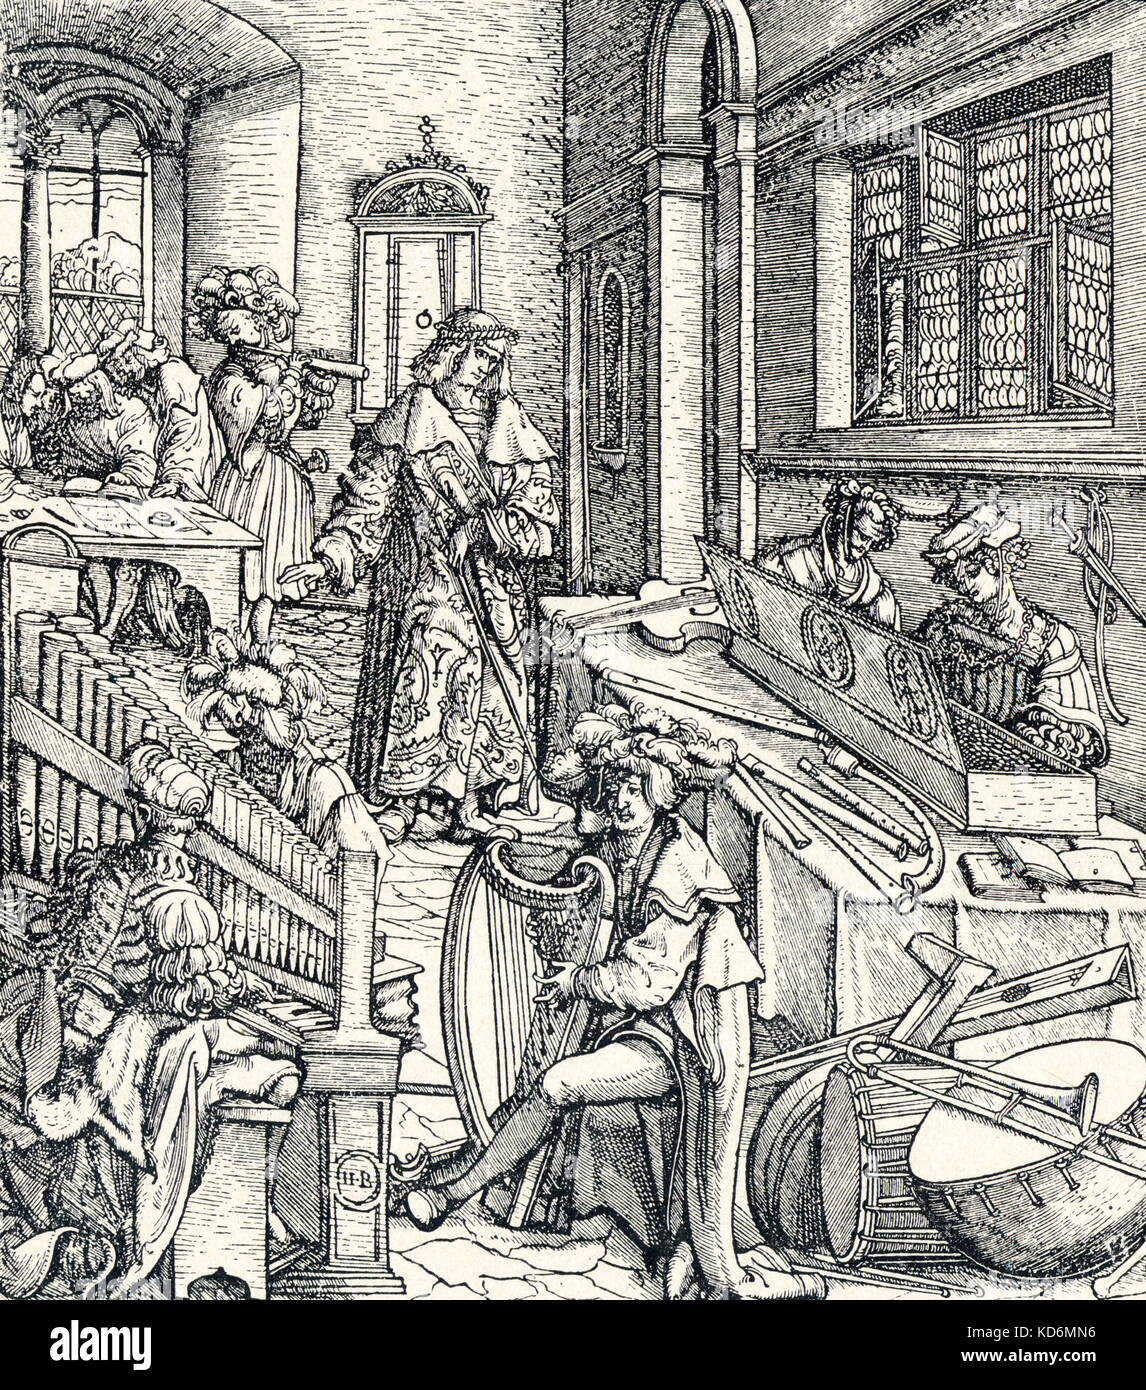 ' History of Music ' - woodcut by Hans Burgkmair (1473-1531) from his prose novel  'Der Weisskunig ' in praise of his emperor Maximilian I Early music instruments being made. Portative organ, harp, wind, brass. Workshop. Stock Photo